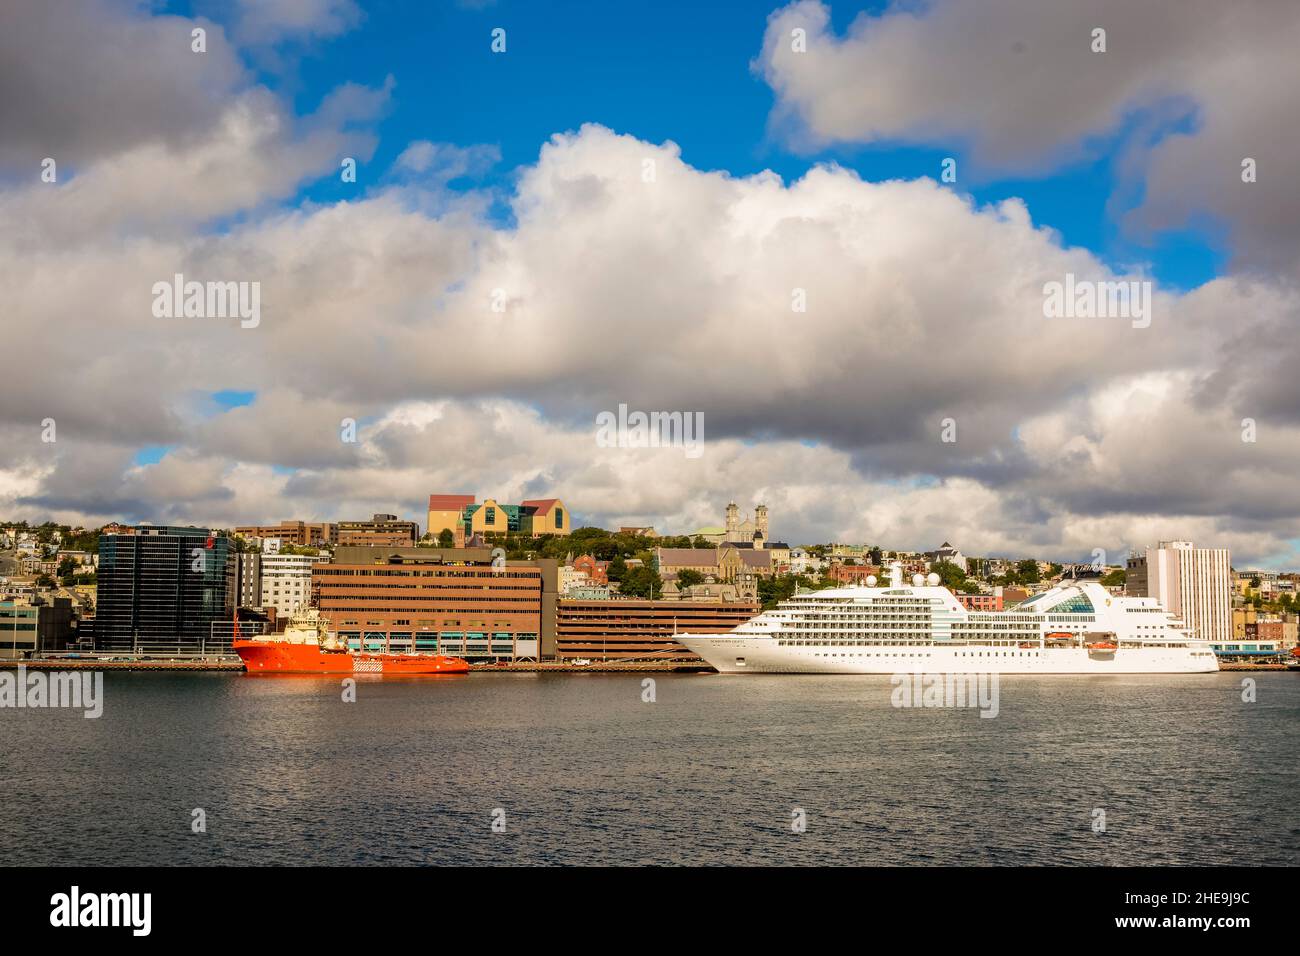 Seabourne Quest Cruise ship docked in St. John's, Newfoundland, Canada. Stock Photo